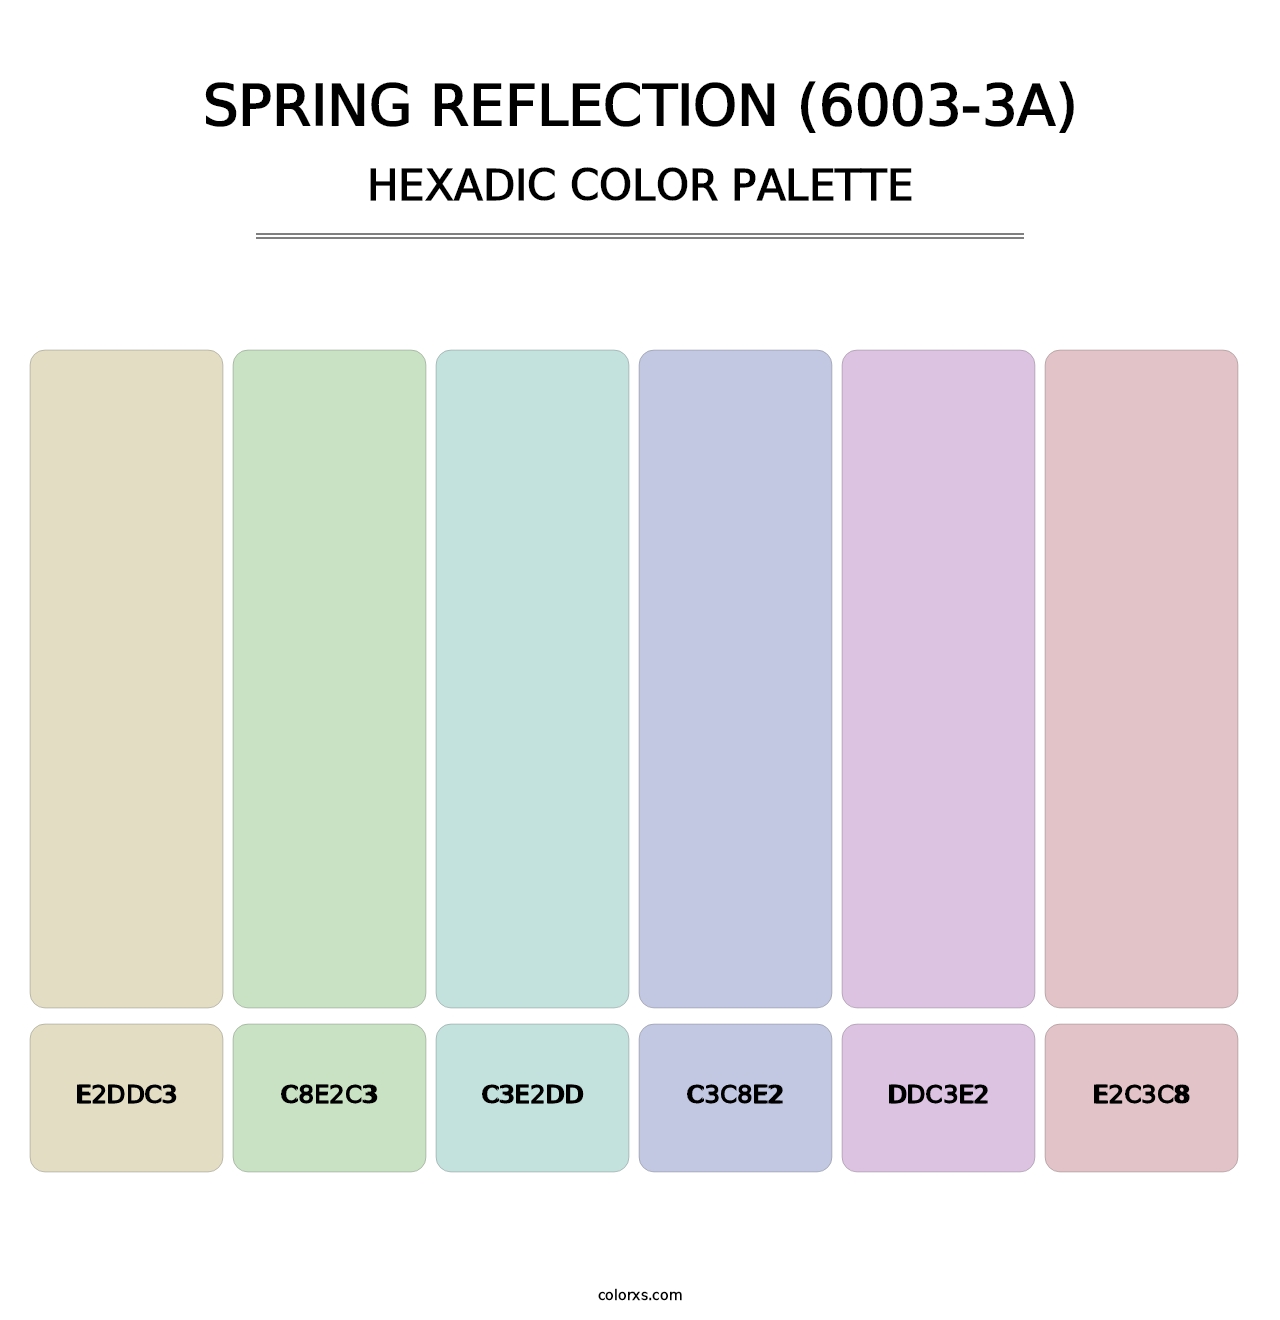 Spring Reflection (6003-3A) - Hexadic Color Palette